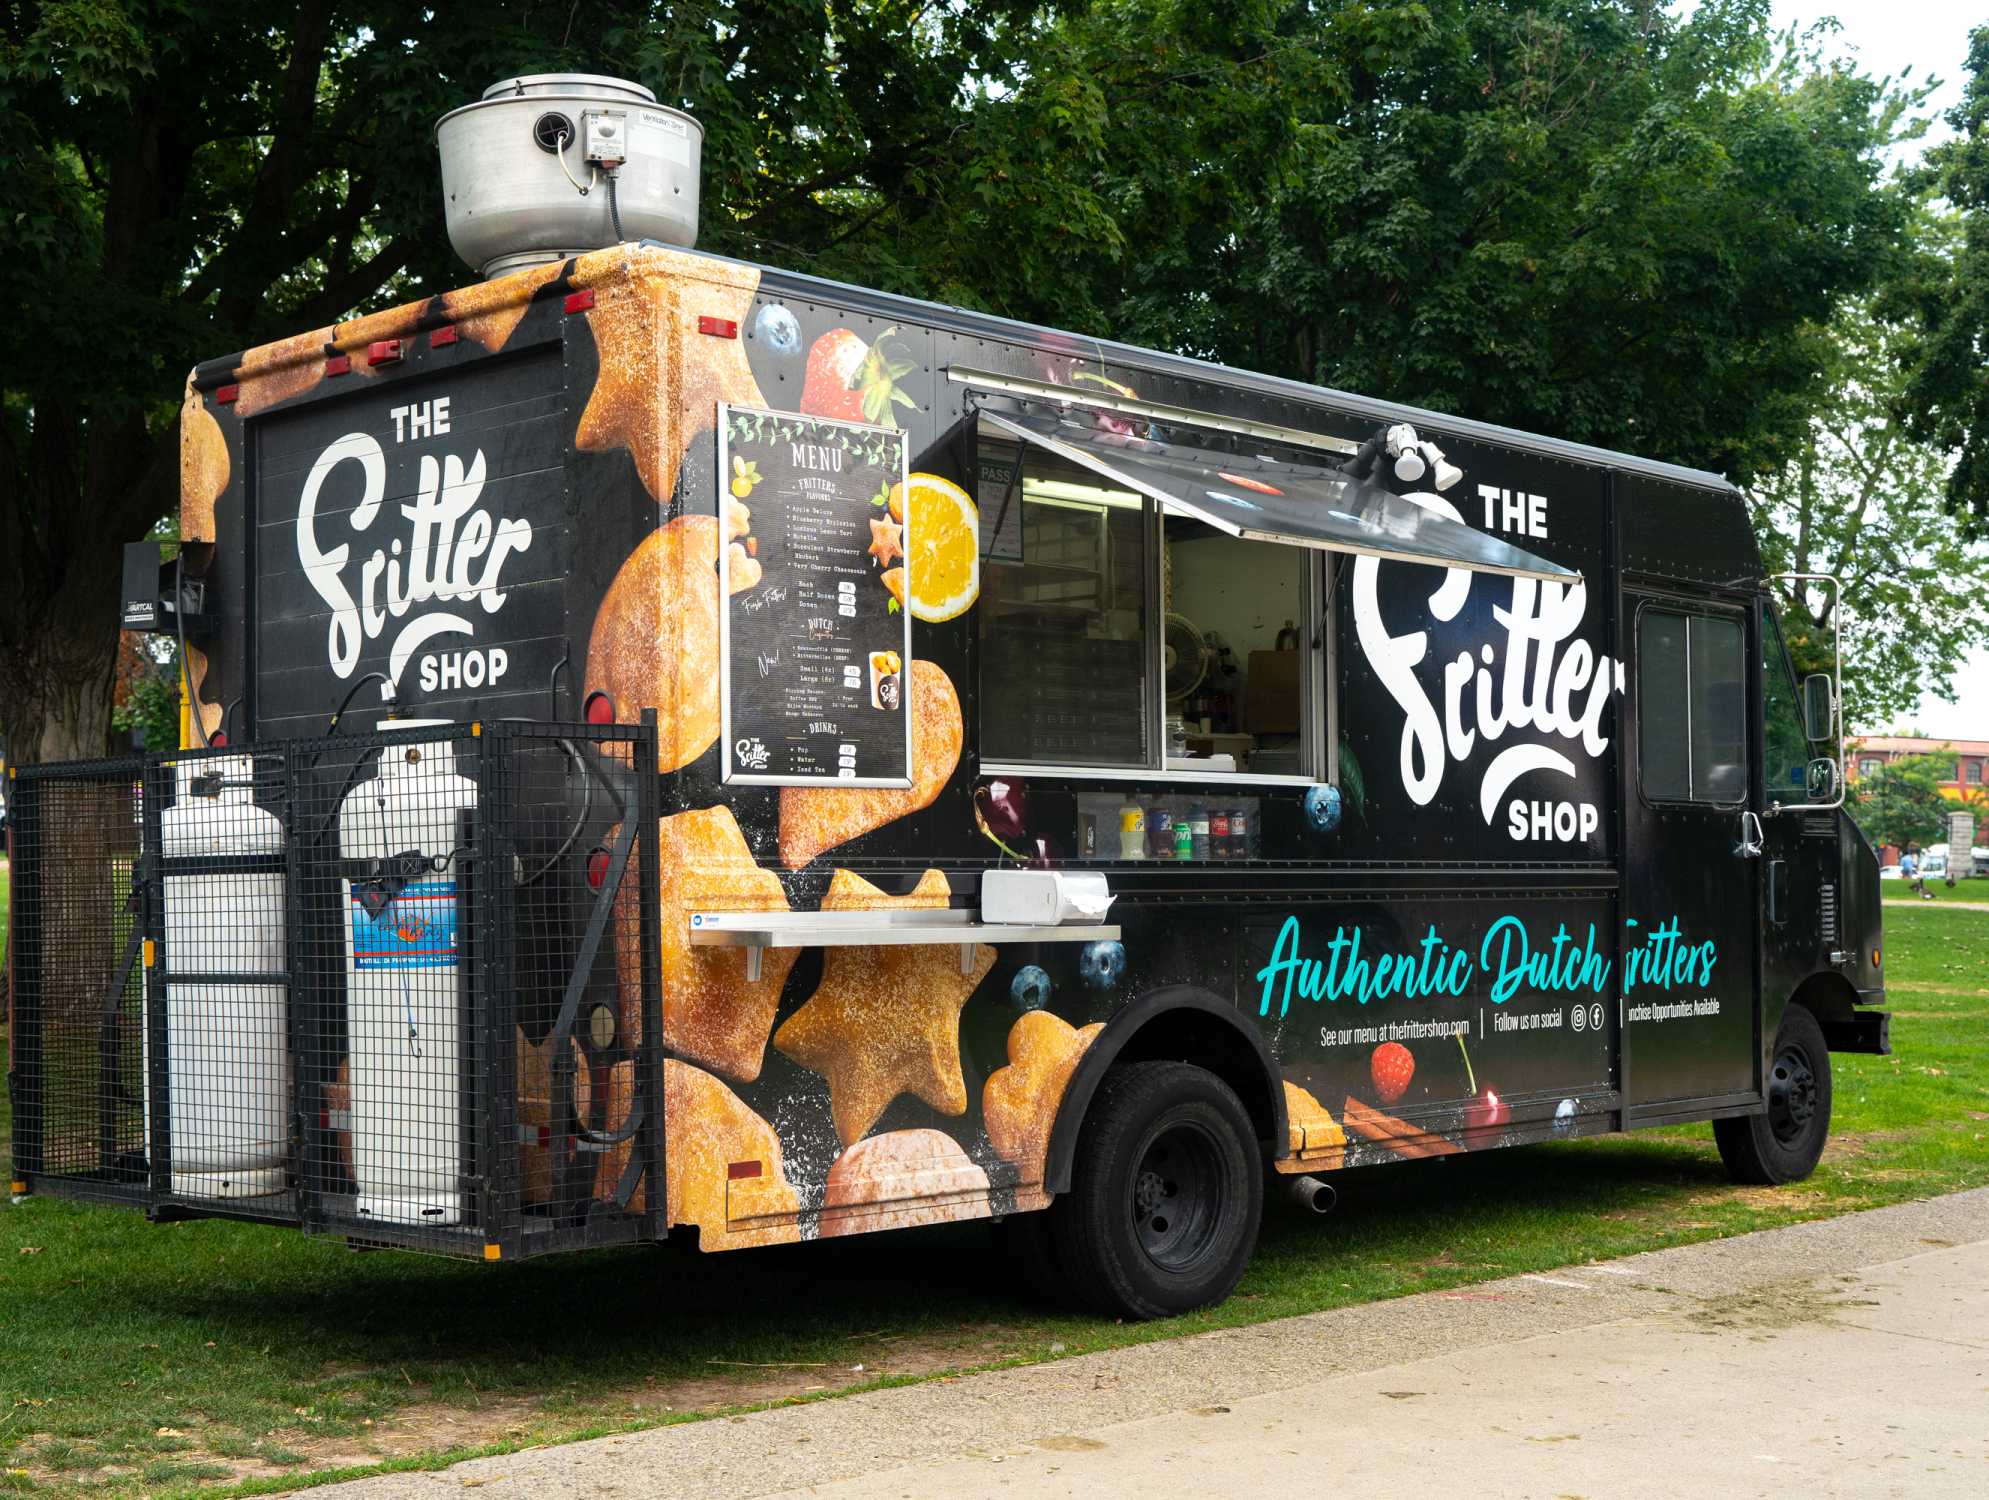 The Fritter Shop's food truck in a park